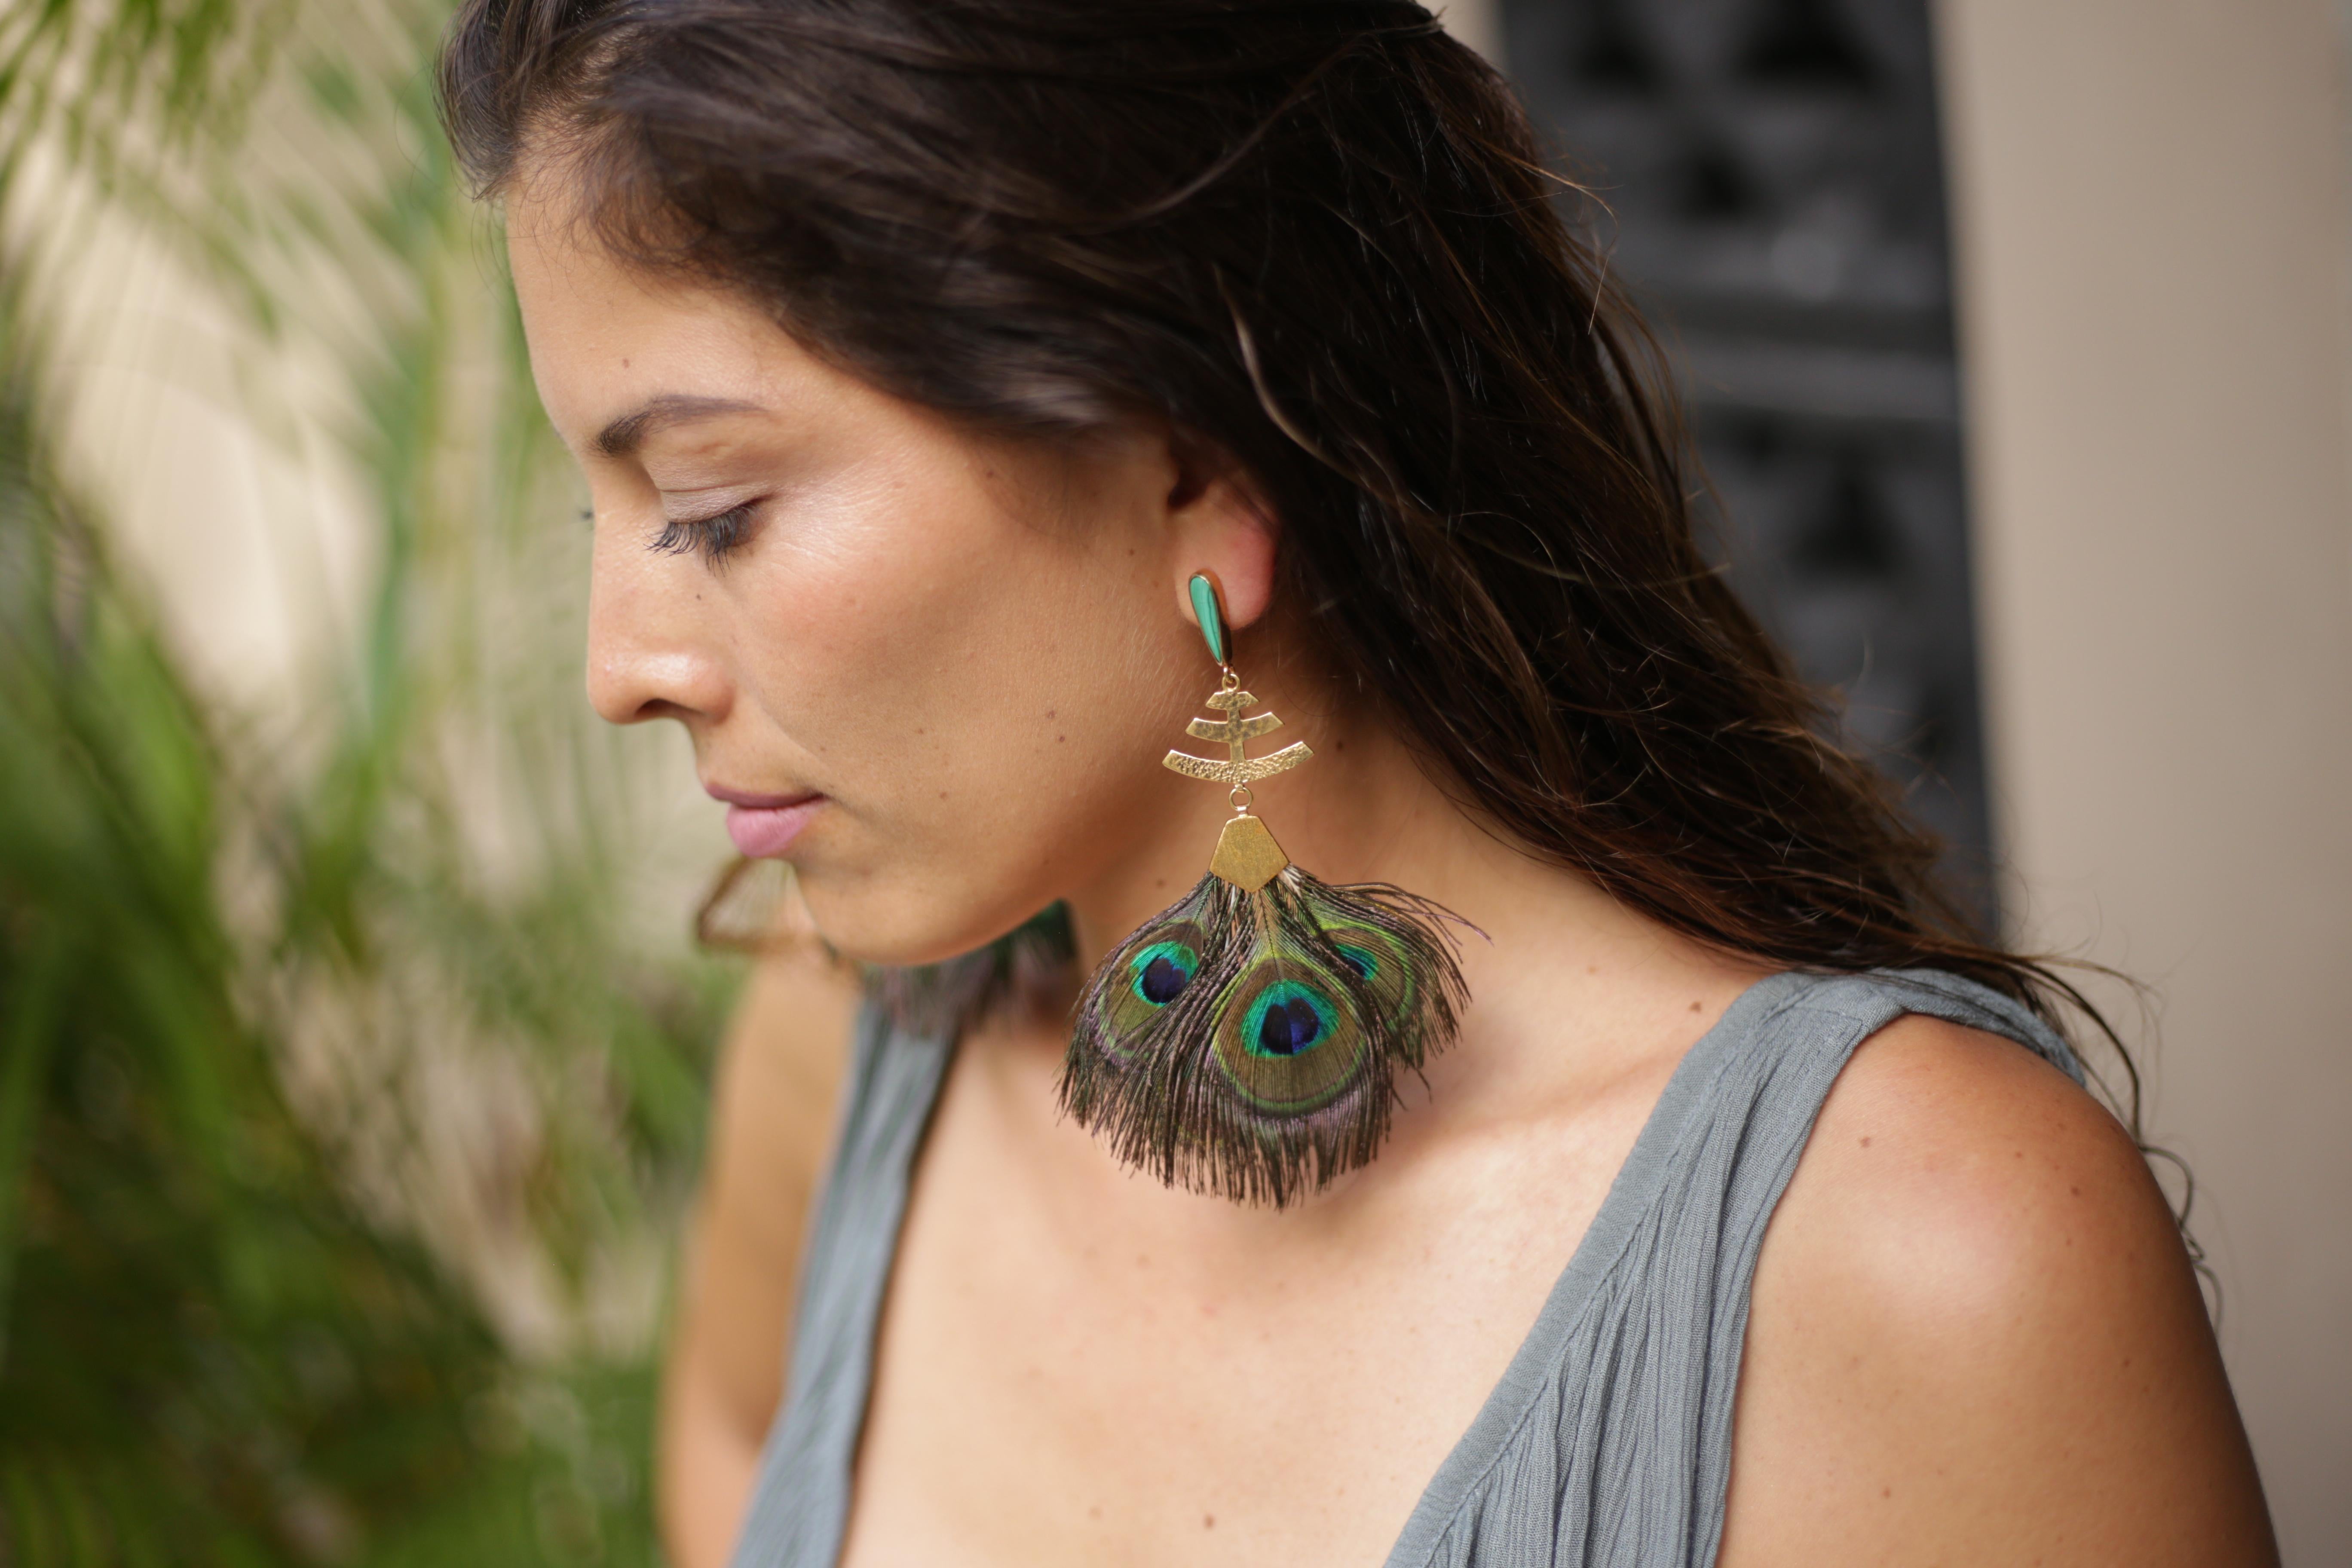 Artisan Abanico Earrings in 14k Yellow Gold, Peacock Feathers, and Malachite For Sale